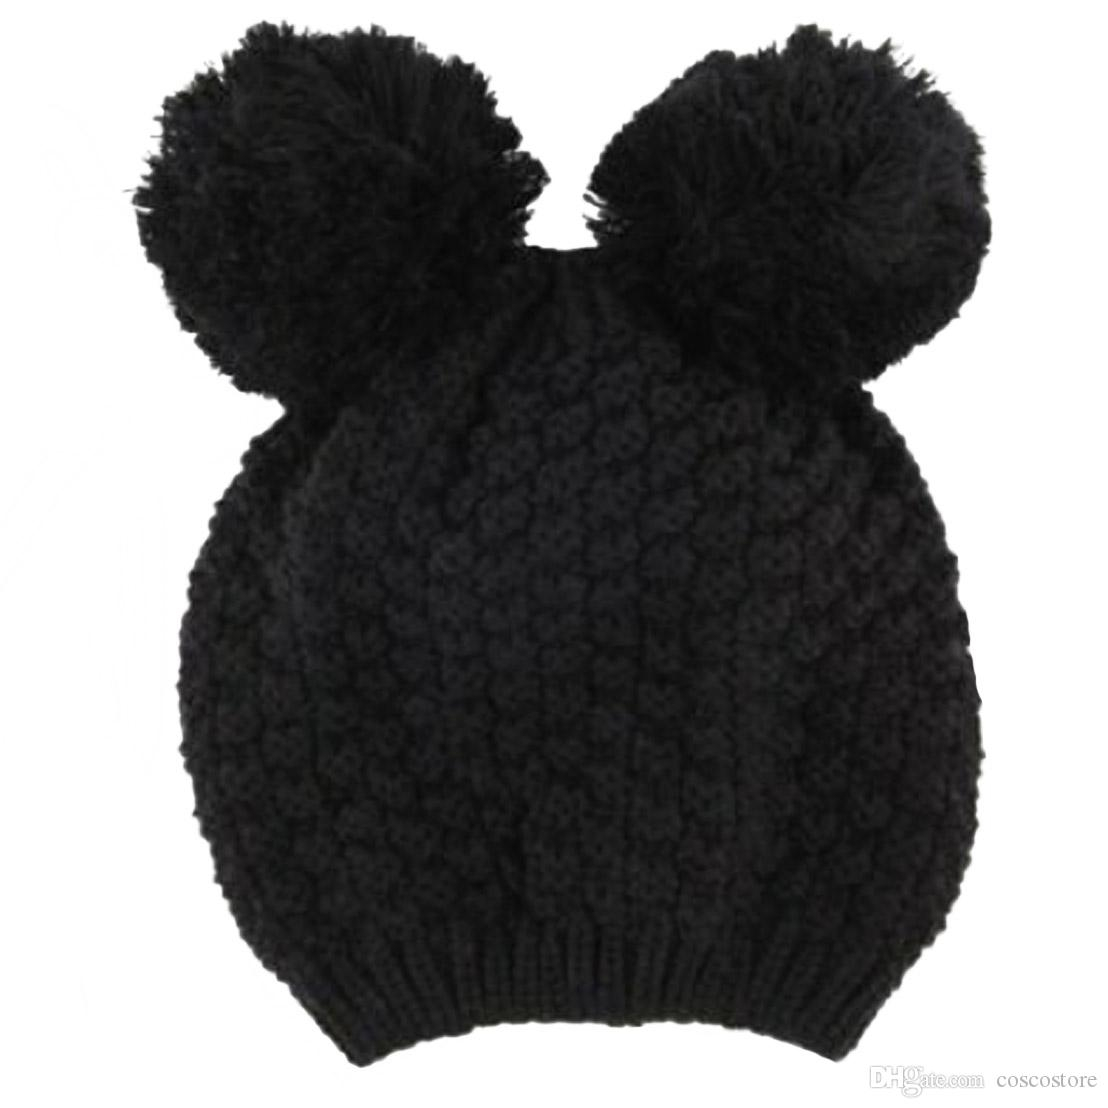 Knitting Pattern For Mickey Mouse Hat Seoproductname